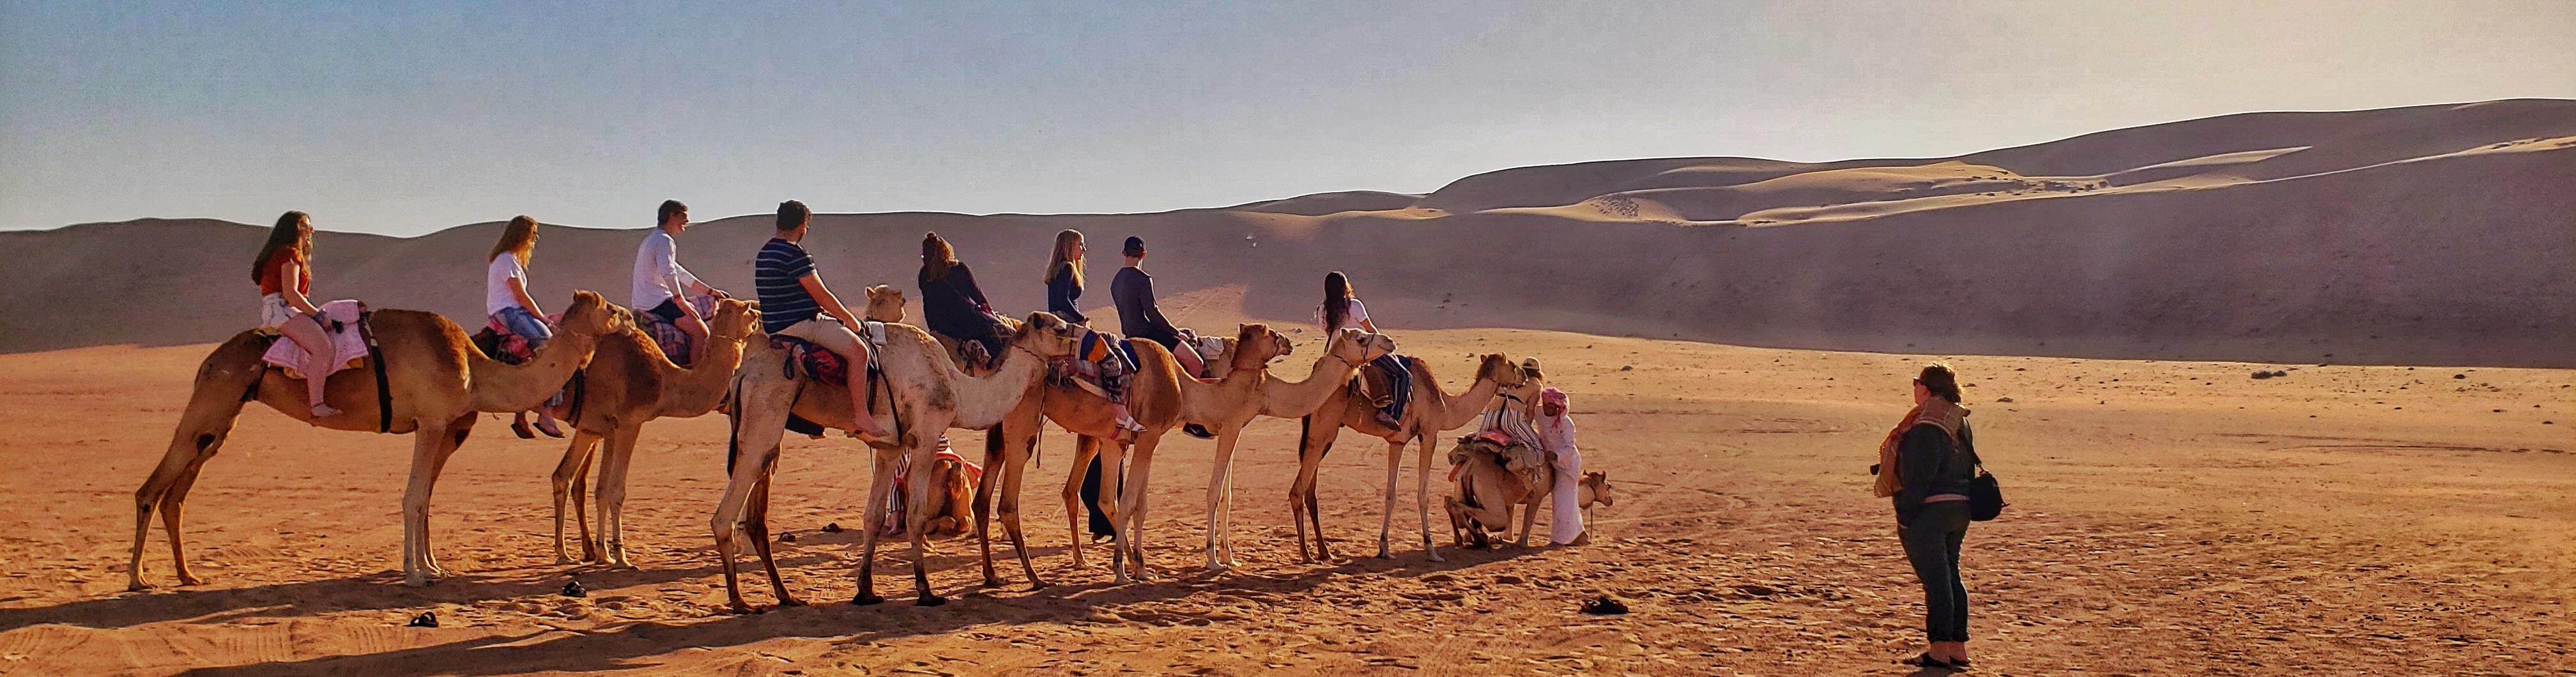 A group of students riding on camels.